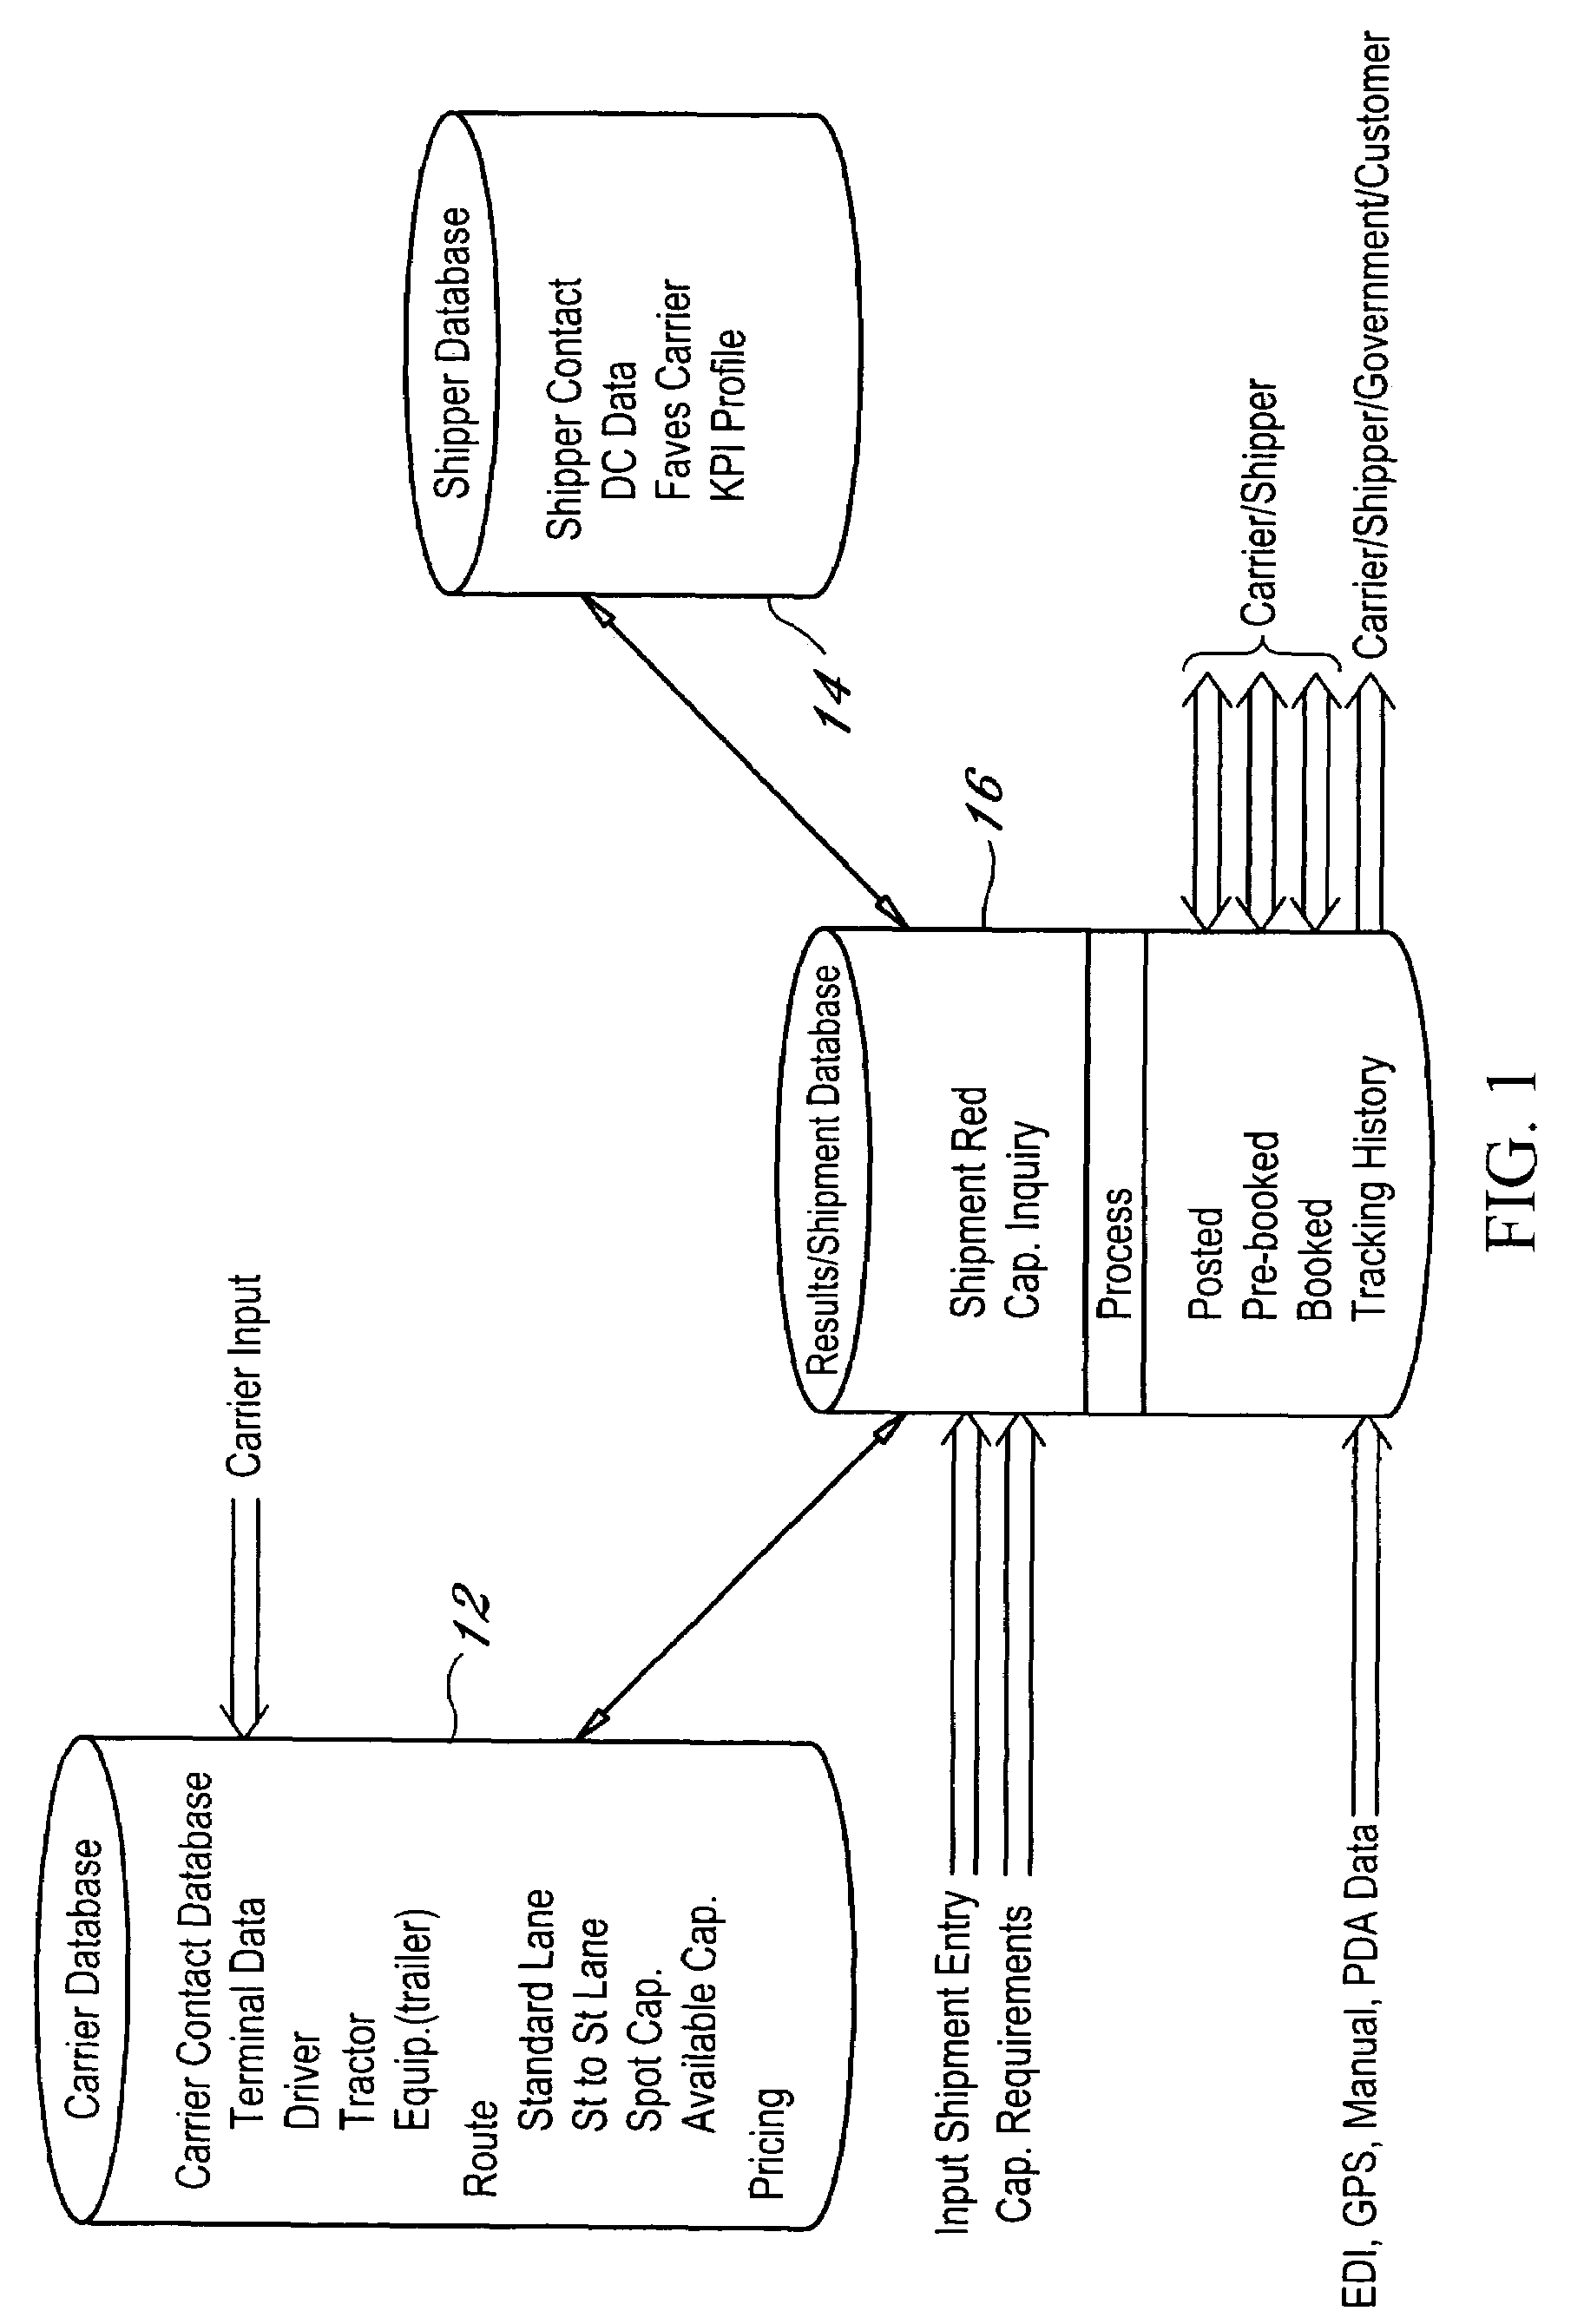 Dynamic and predictive information system and method for shipping assets and transport